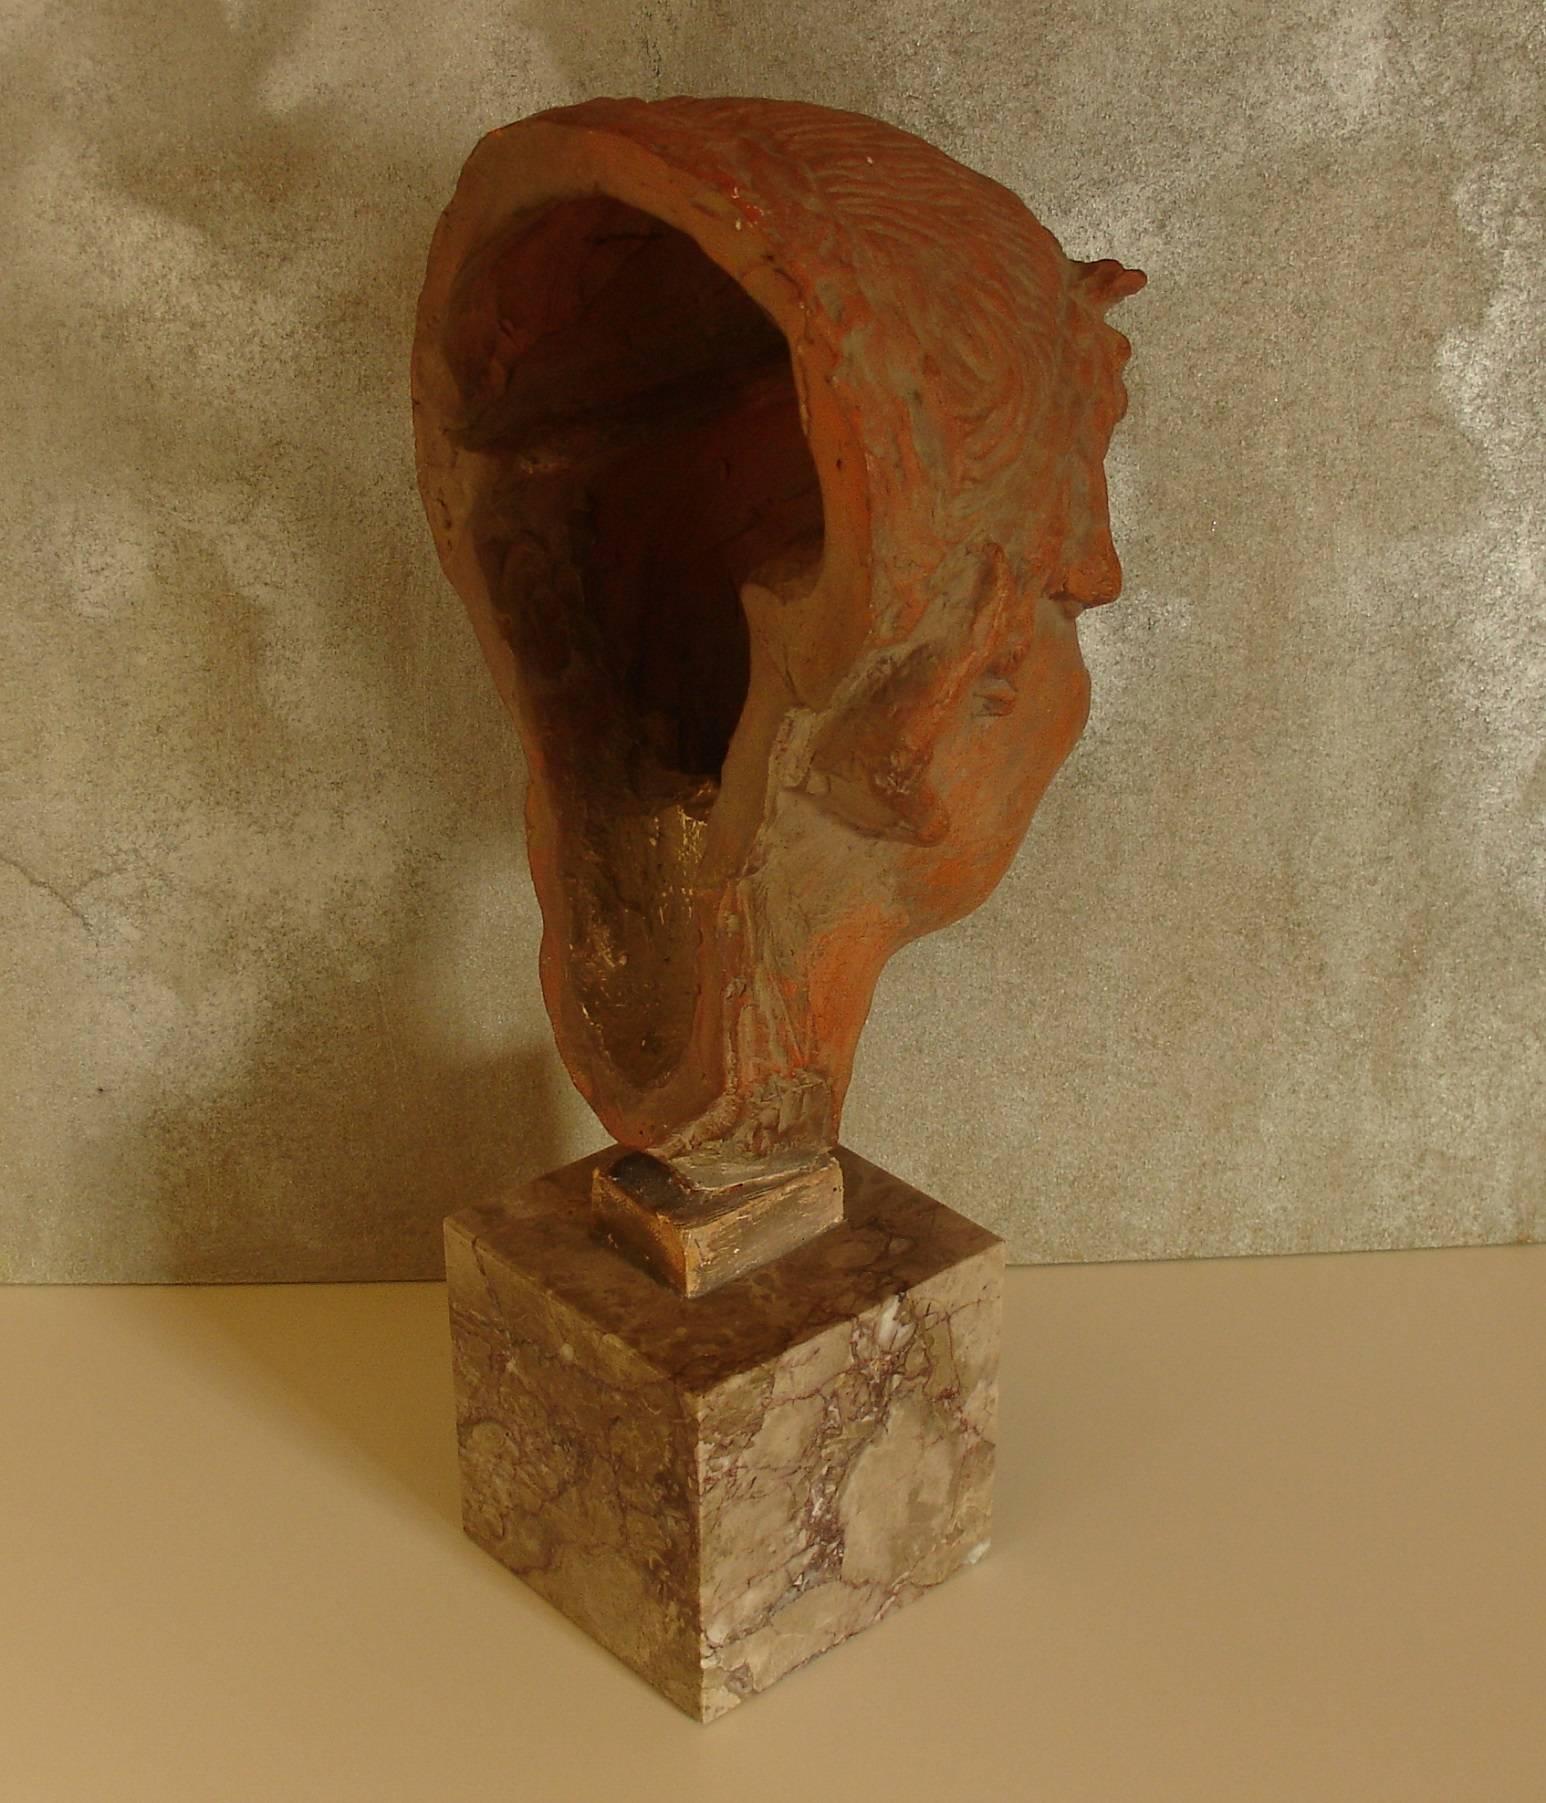 Fired Terracotta Sculpture of a Faun's Head in the Manner of Carpeaux, French